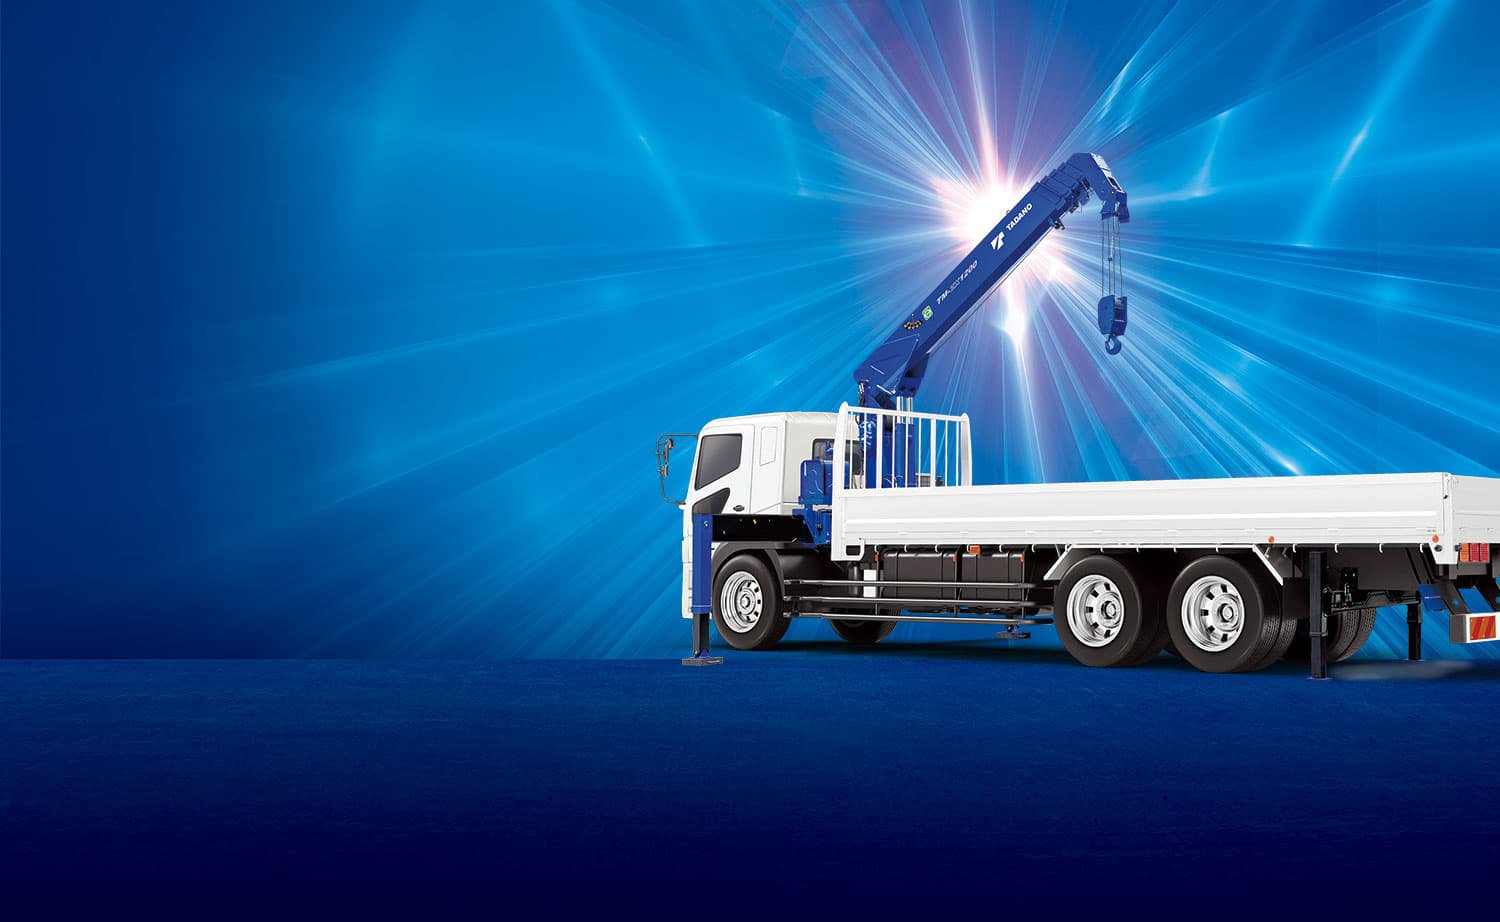 New Release: Tadano's TM-ZX1200 Truck Loader Cranes Add Range, Reinforced Safety, And Improved Efficiency